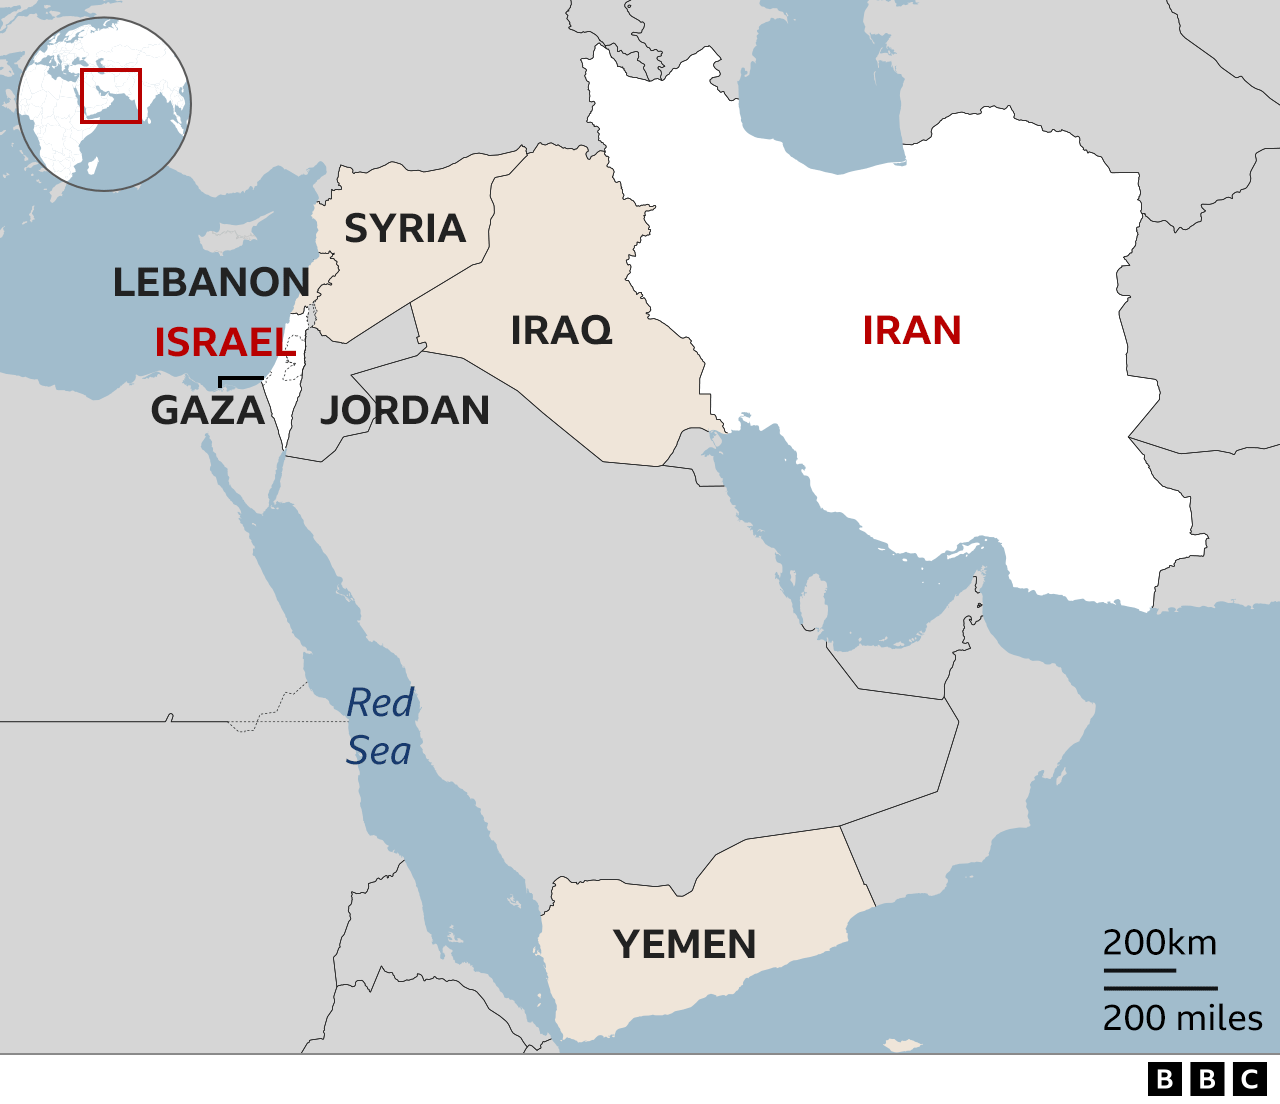 Map showing the Middle East and highlighting Iran, Iraq, Lebanon, Syria, Yemen and Israel and Gaza.